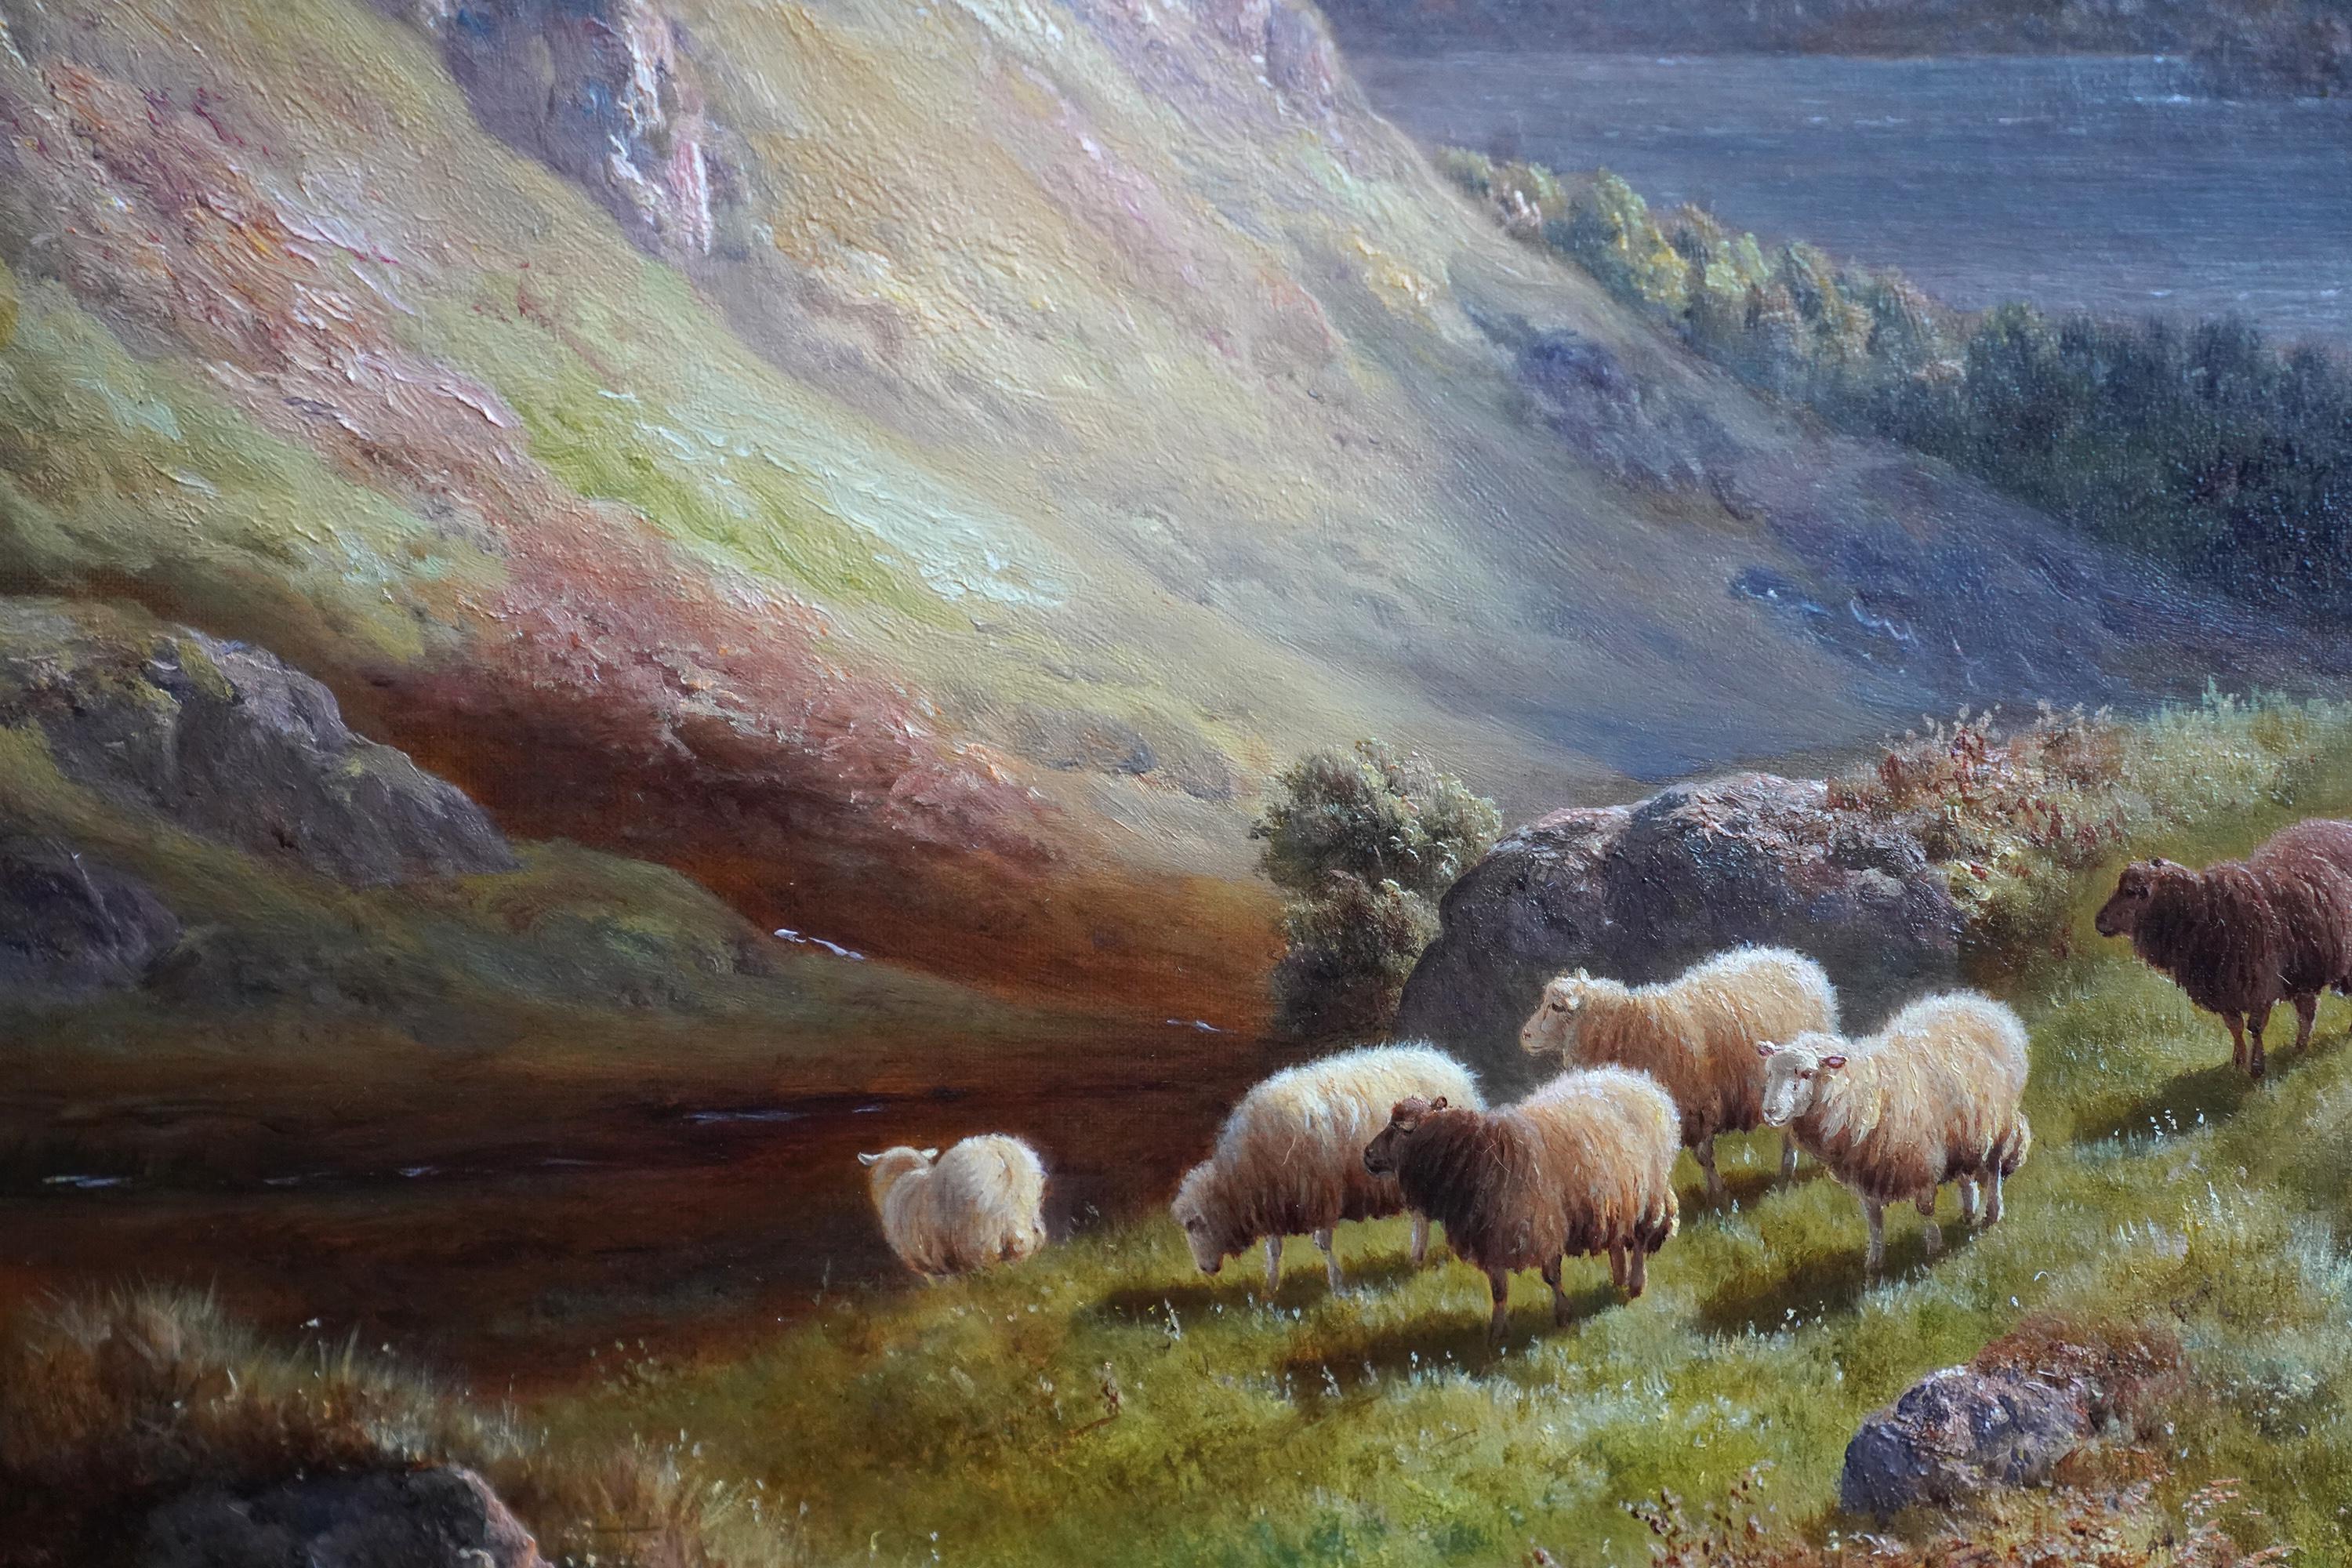 This lovely British Victorian landscape oil painting is by artist William M Davies. It was painted in 1898 and the location is Derwent water at Borrowdale, in Cumberland in the Lake District. In the foreground are a number of sheep and beyond them